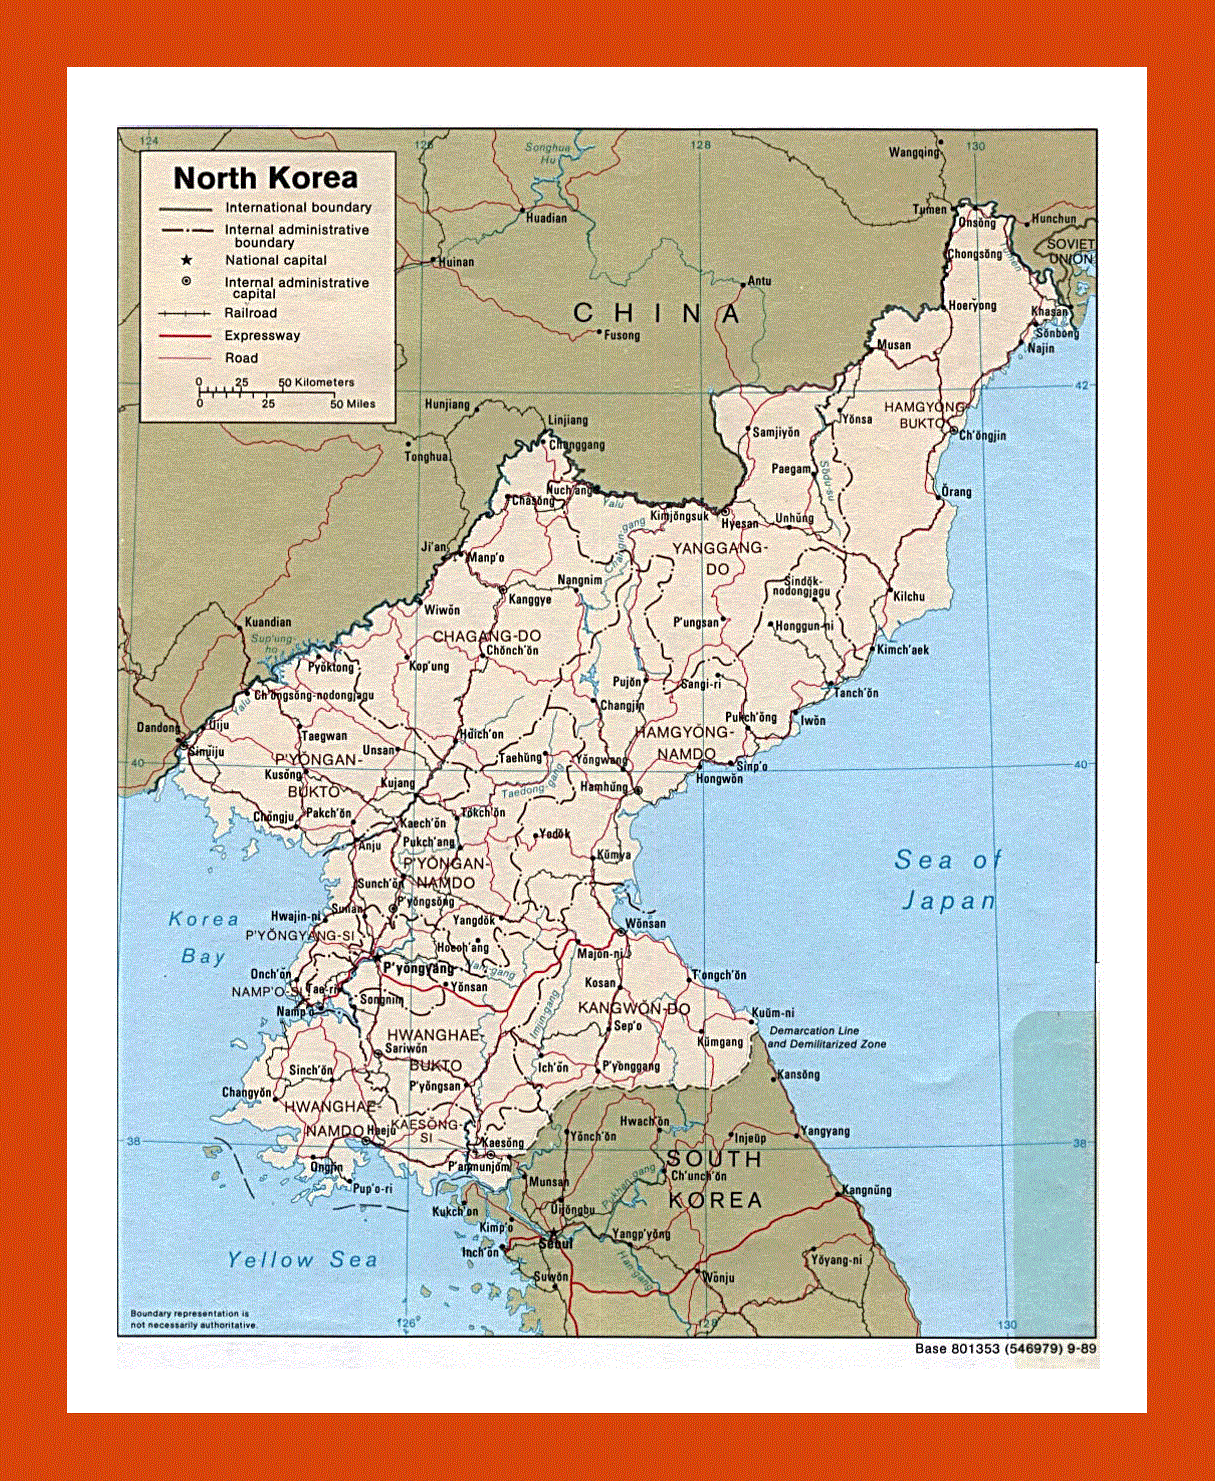 Political and administrative map of North Korea - 1989